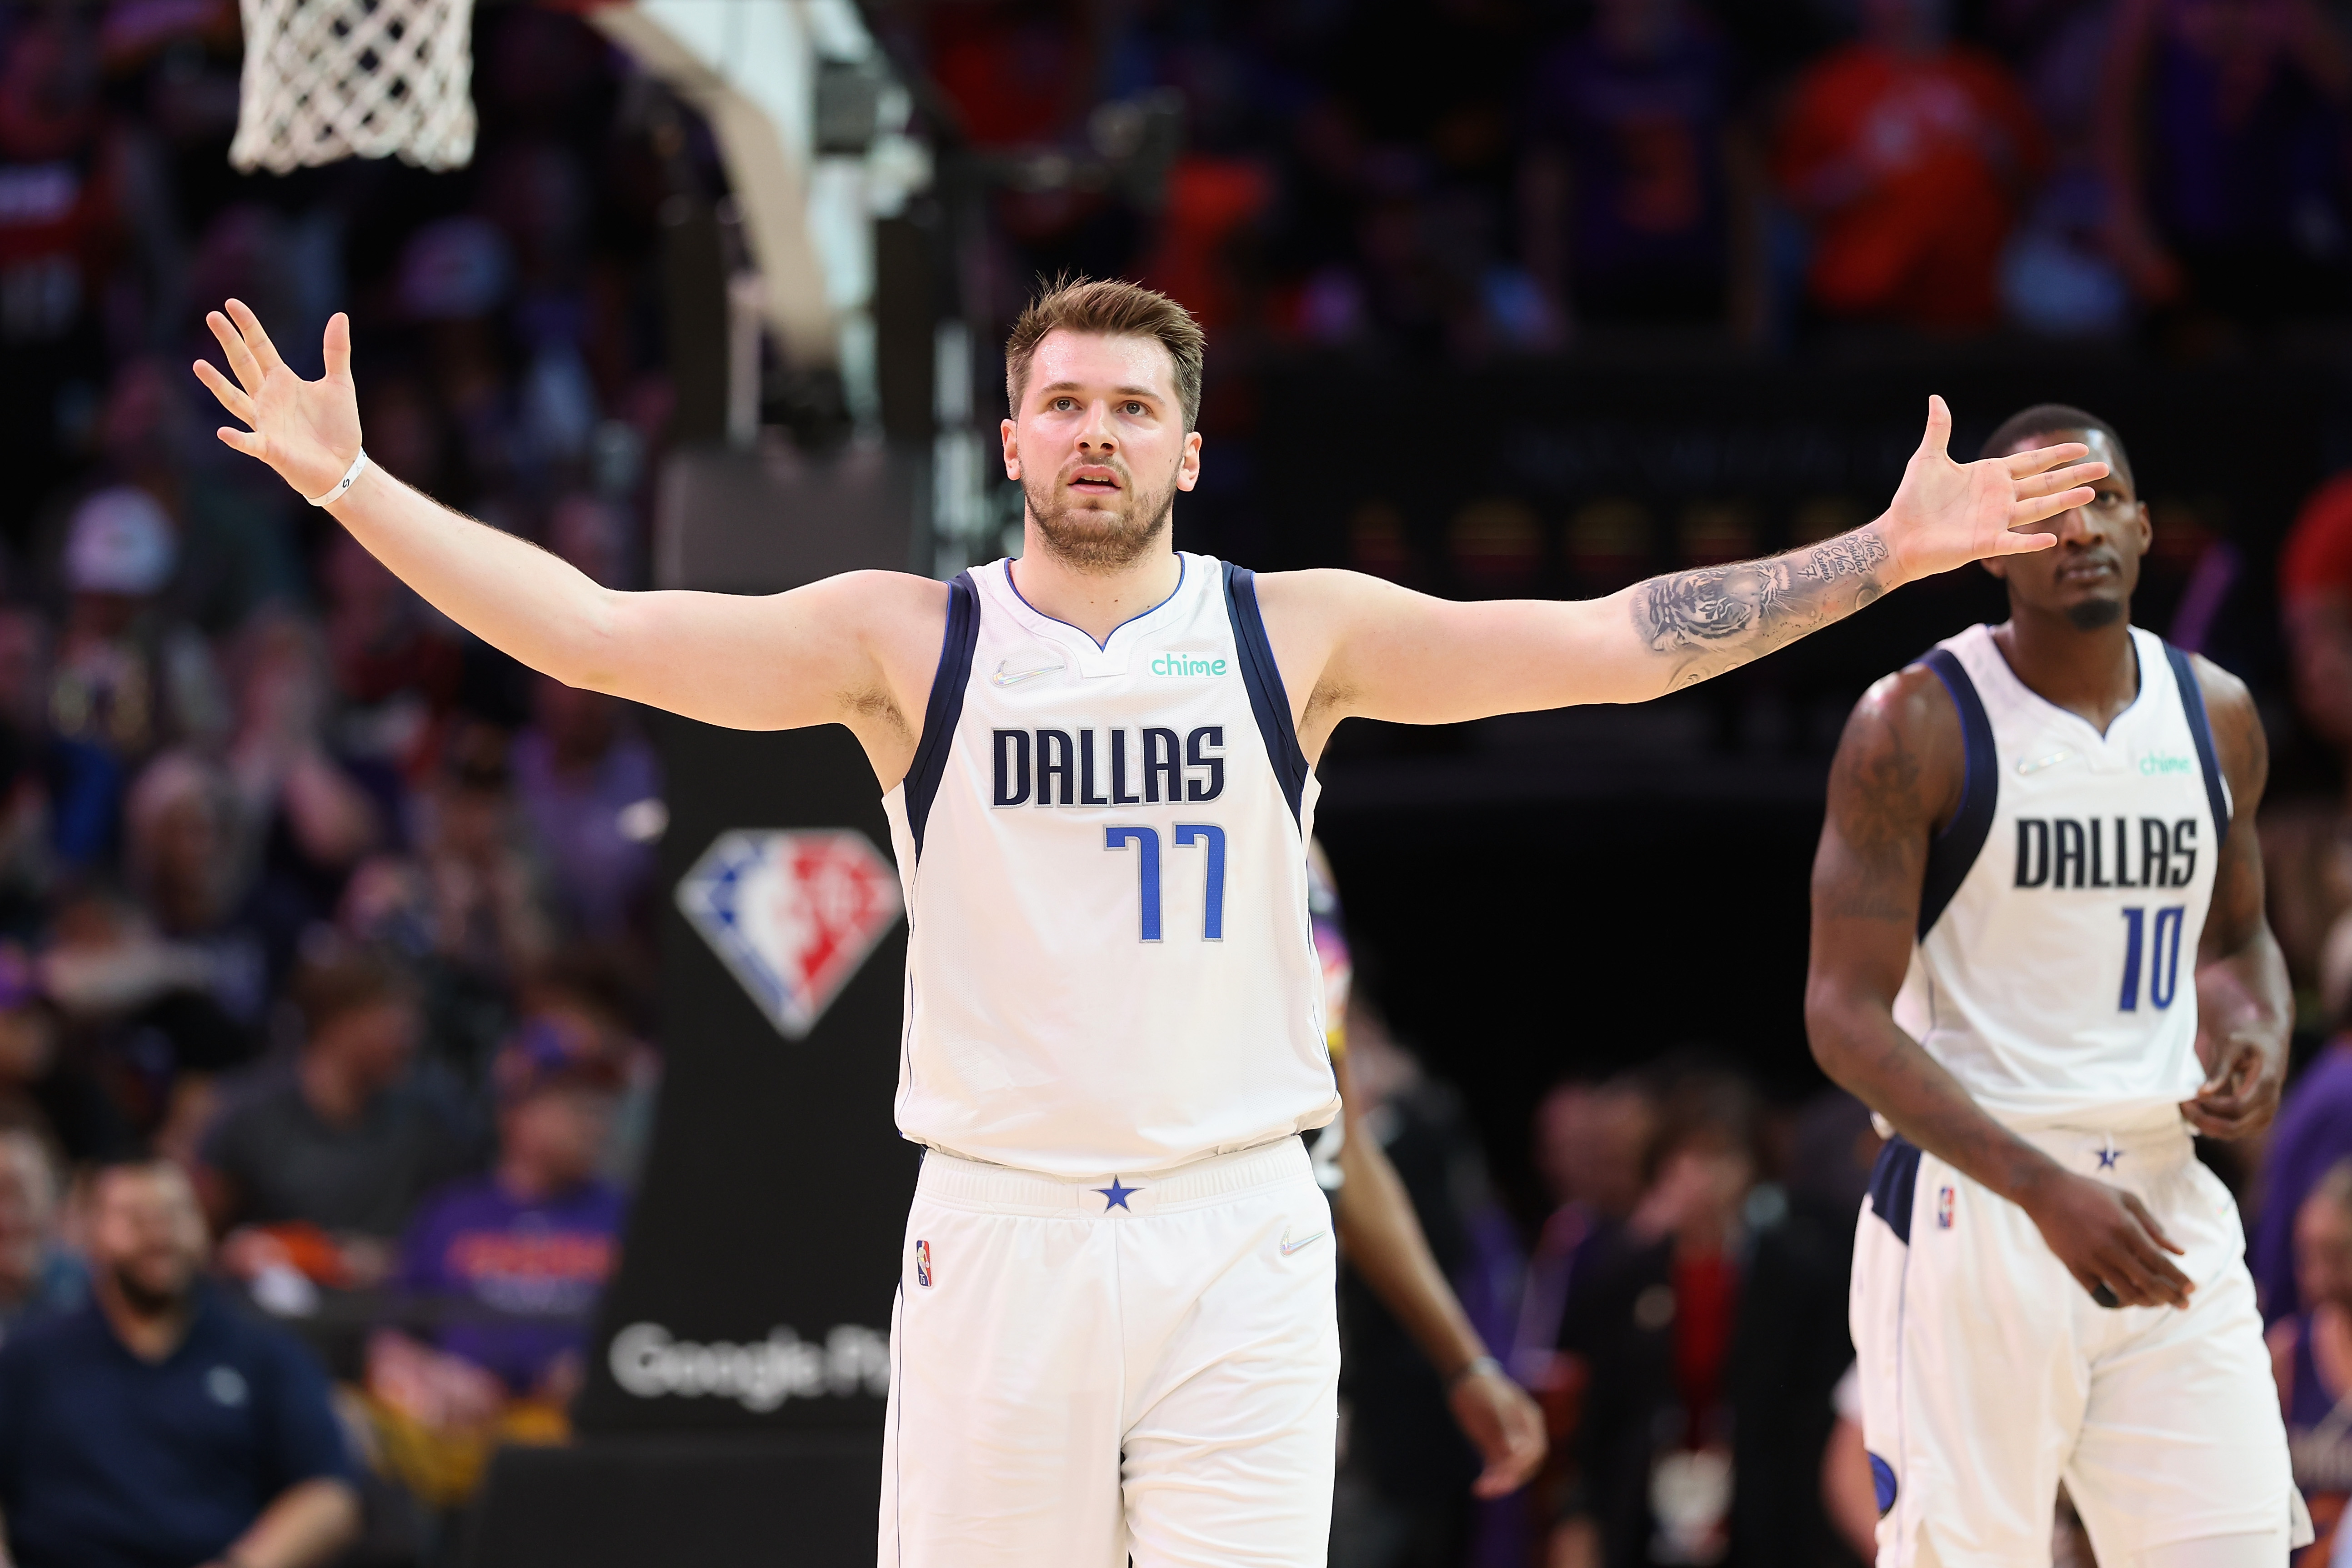 Five takeaways from Thunder's win against Luka Doncic and Mavericks